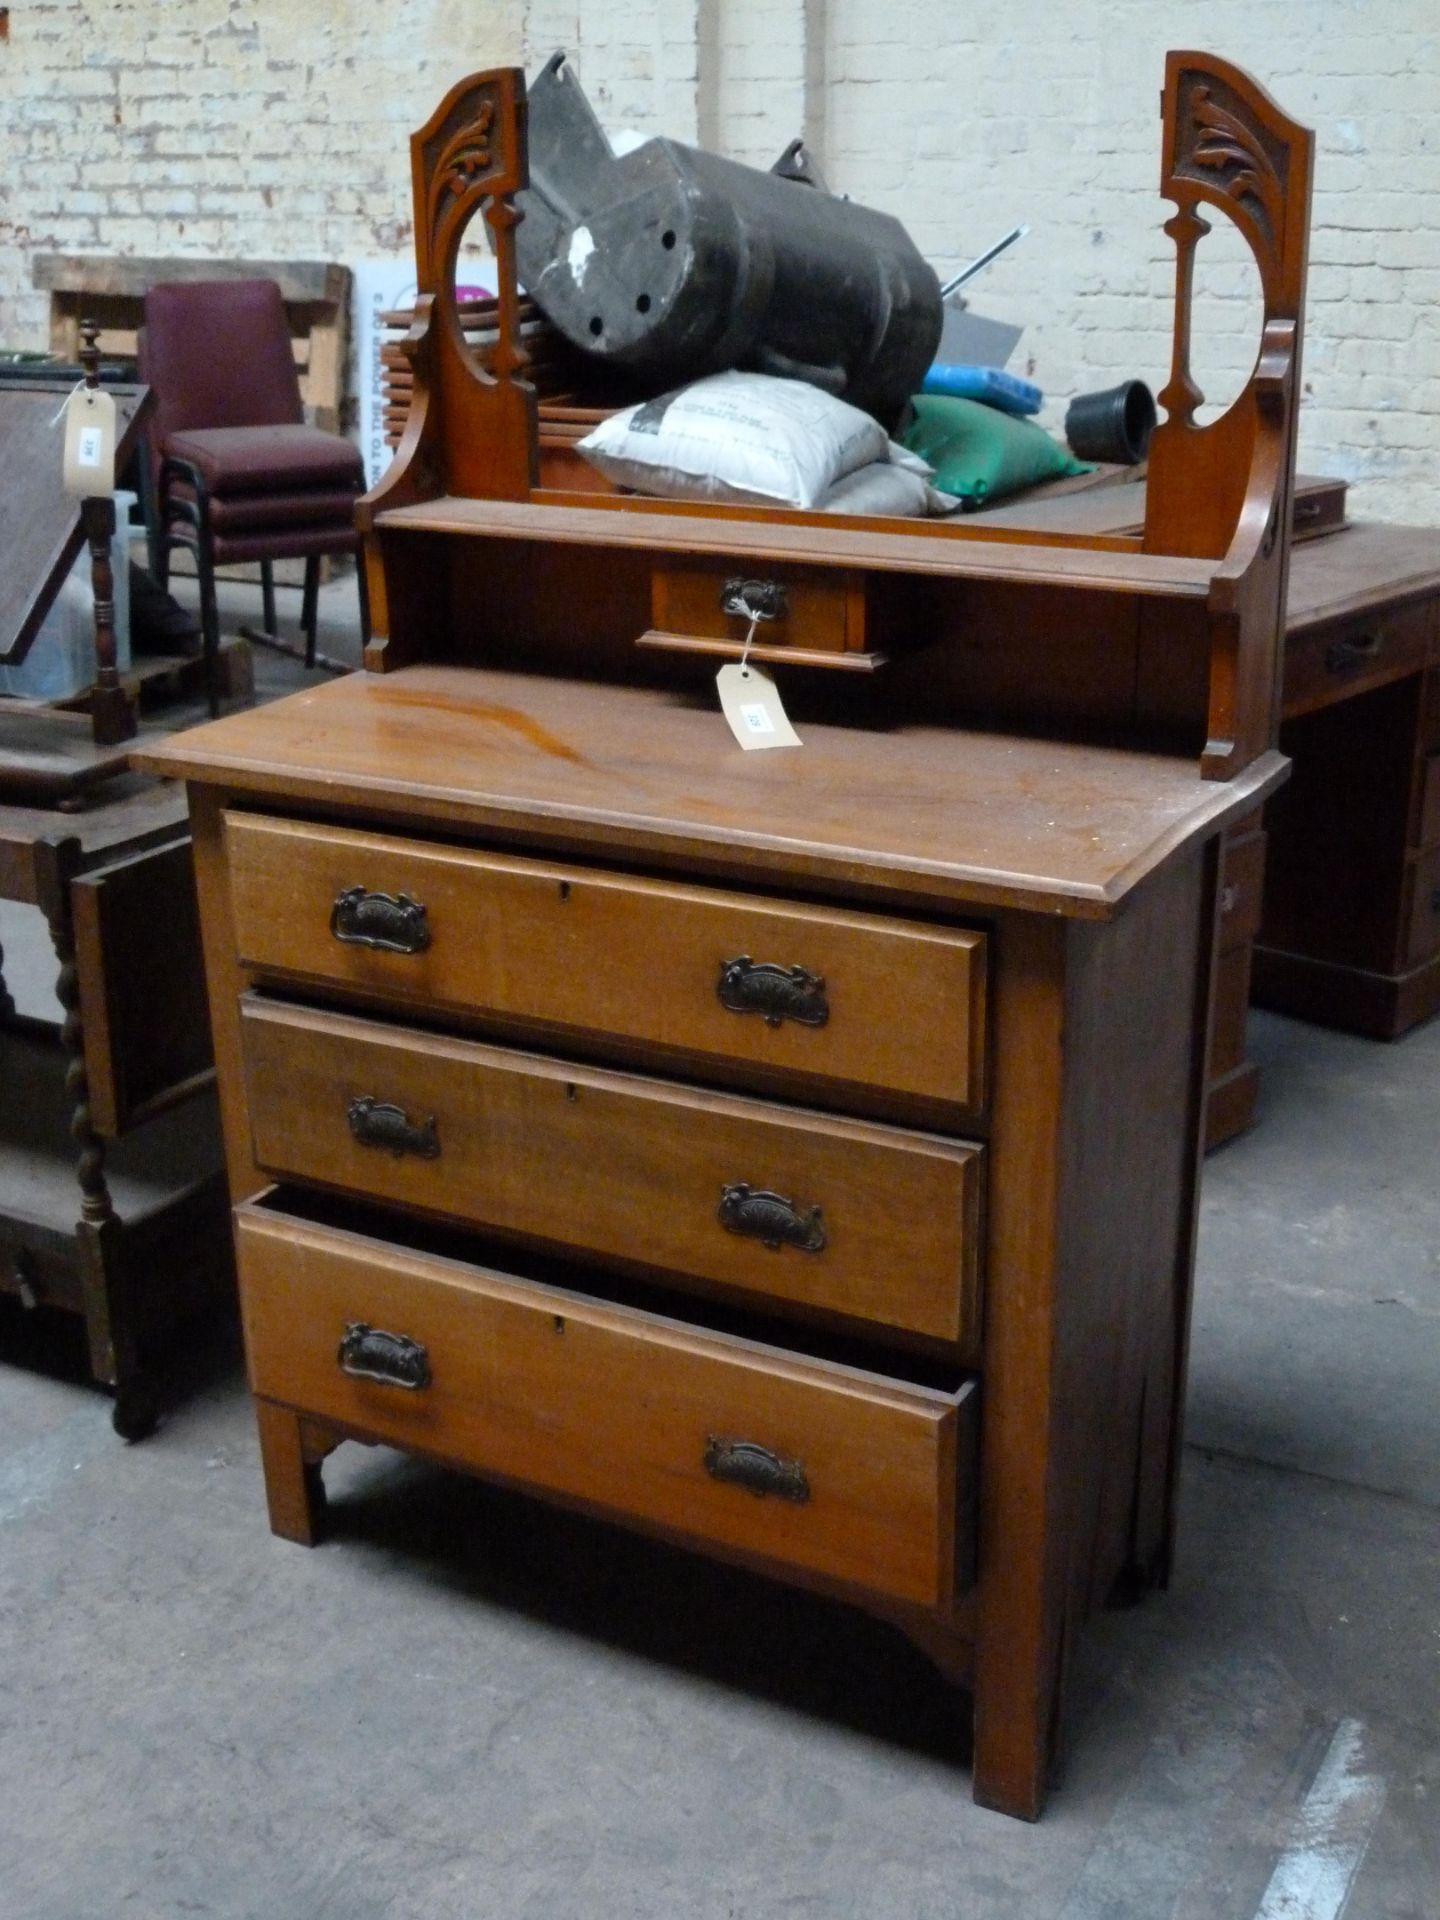 A small dresser style unit with ornate back